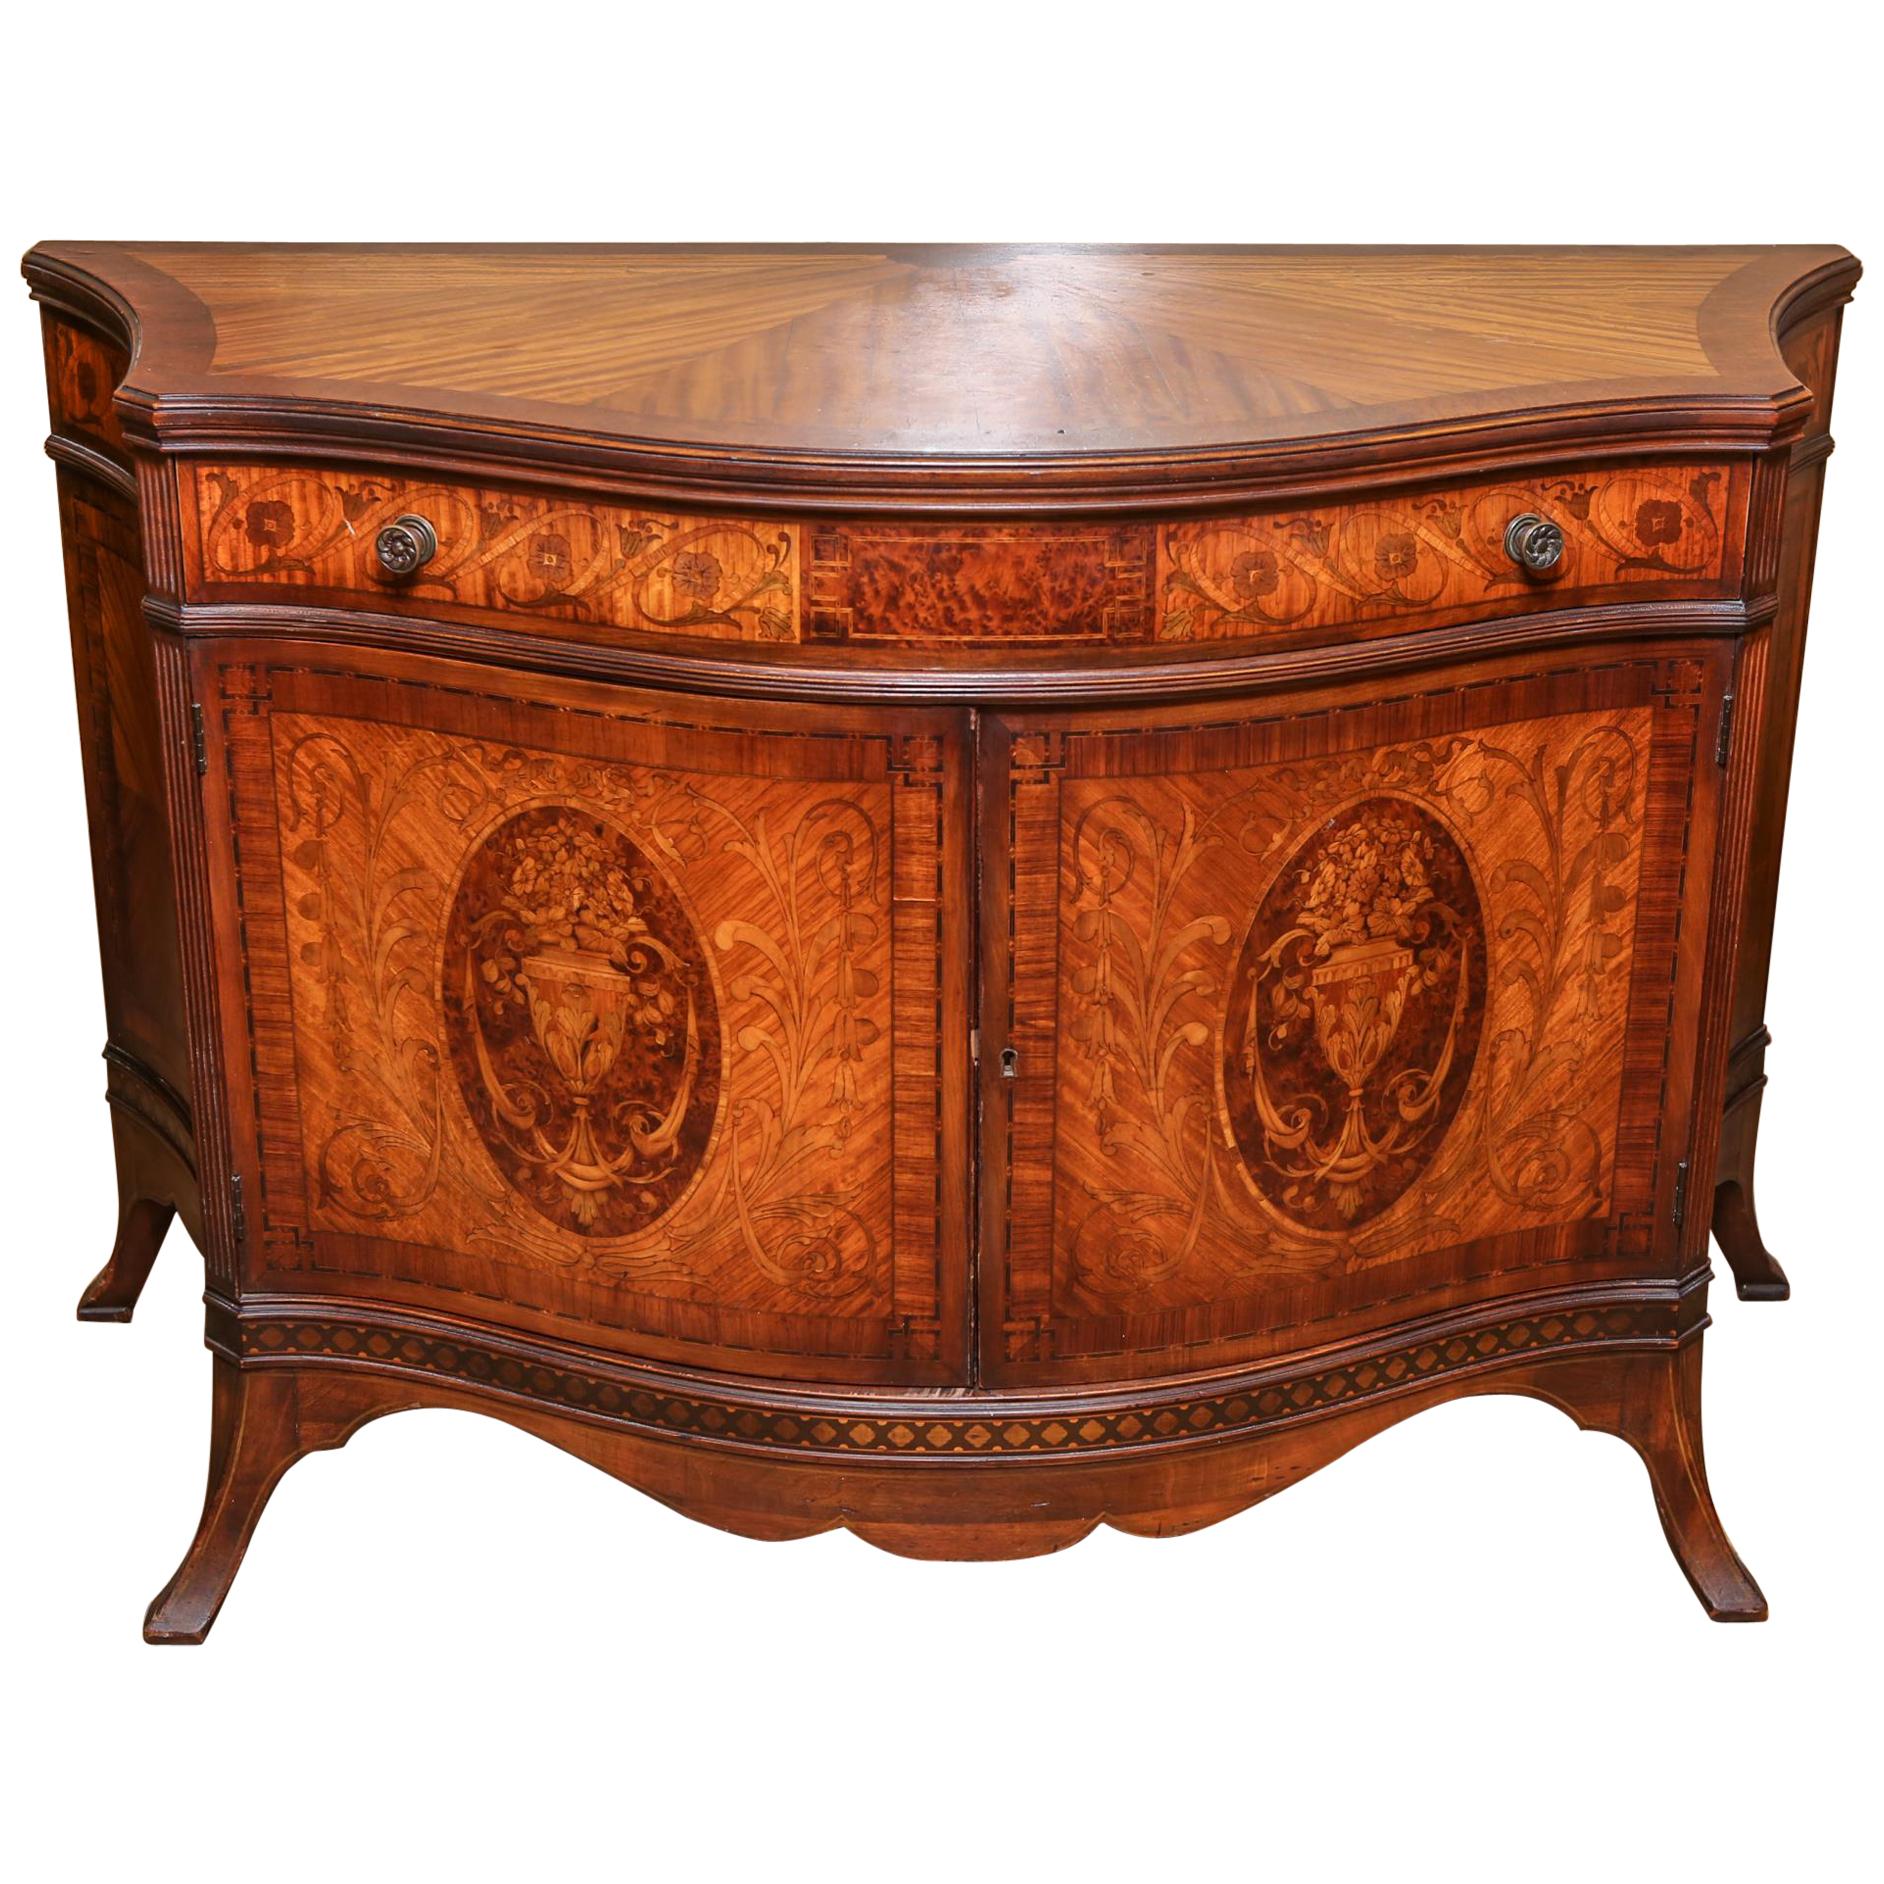 Italian Neoclassical Manner Marquetry Serpentine Commode in Mahogany & Fruitwood